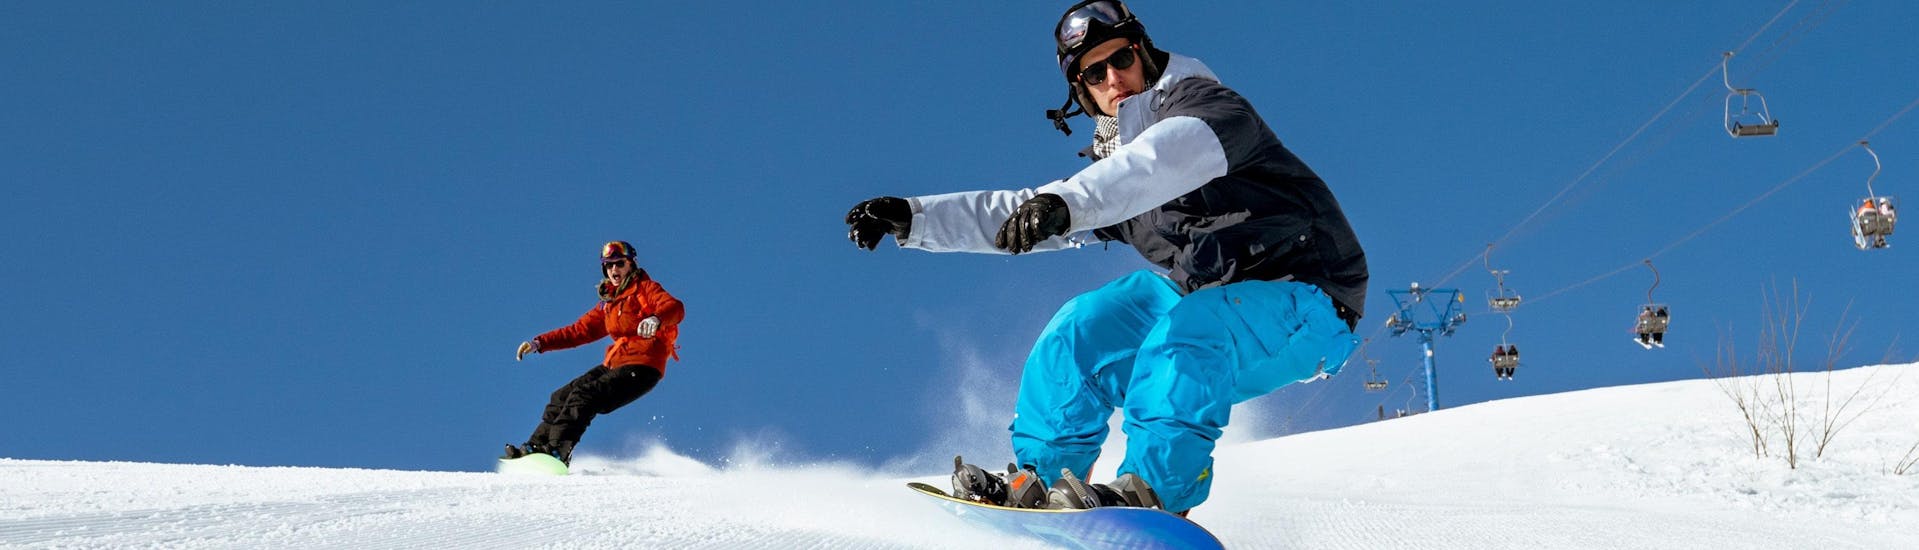 Two snowboarders are racing down a freshly prepared slope during their snowboarding lessons in Grindelwald.